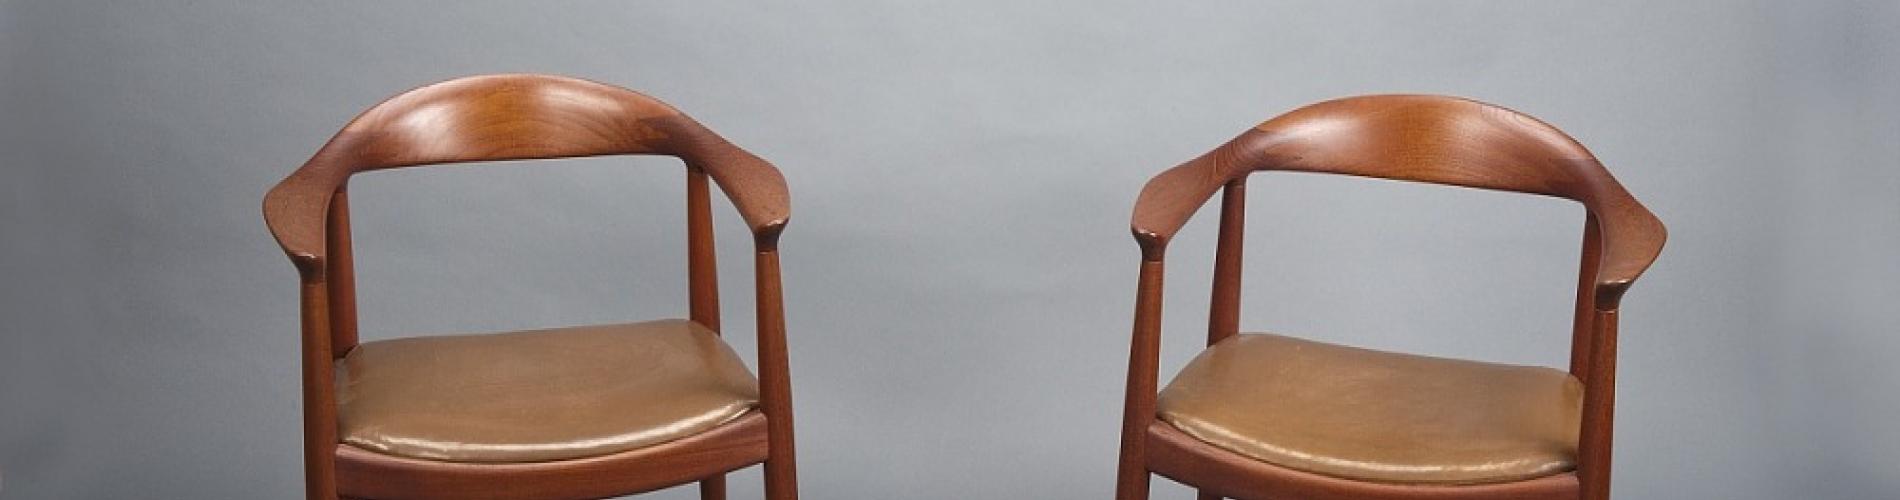 Chairs, used during the September 26, 1960 Nixon and Kennedy presidential debate. Richard Strauss.